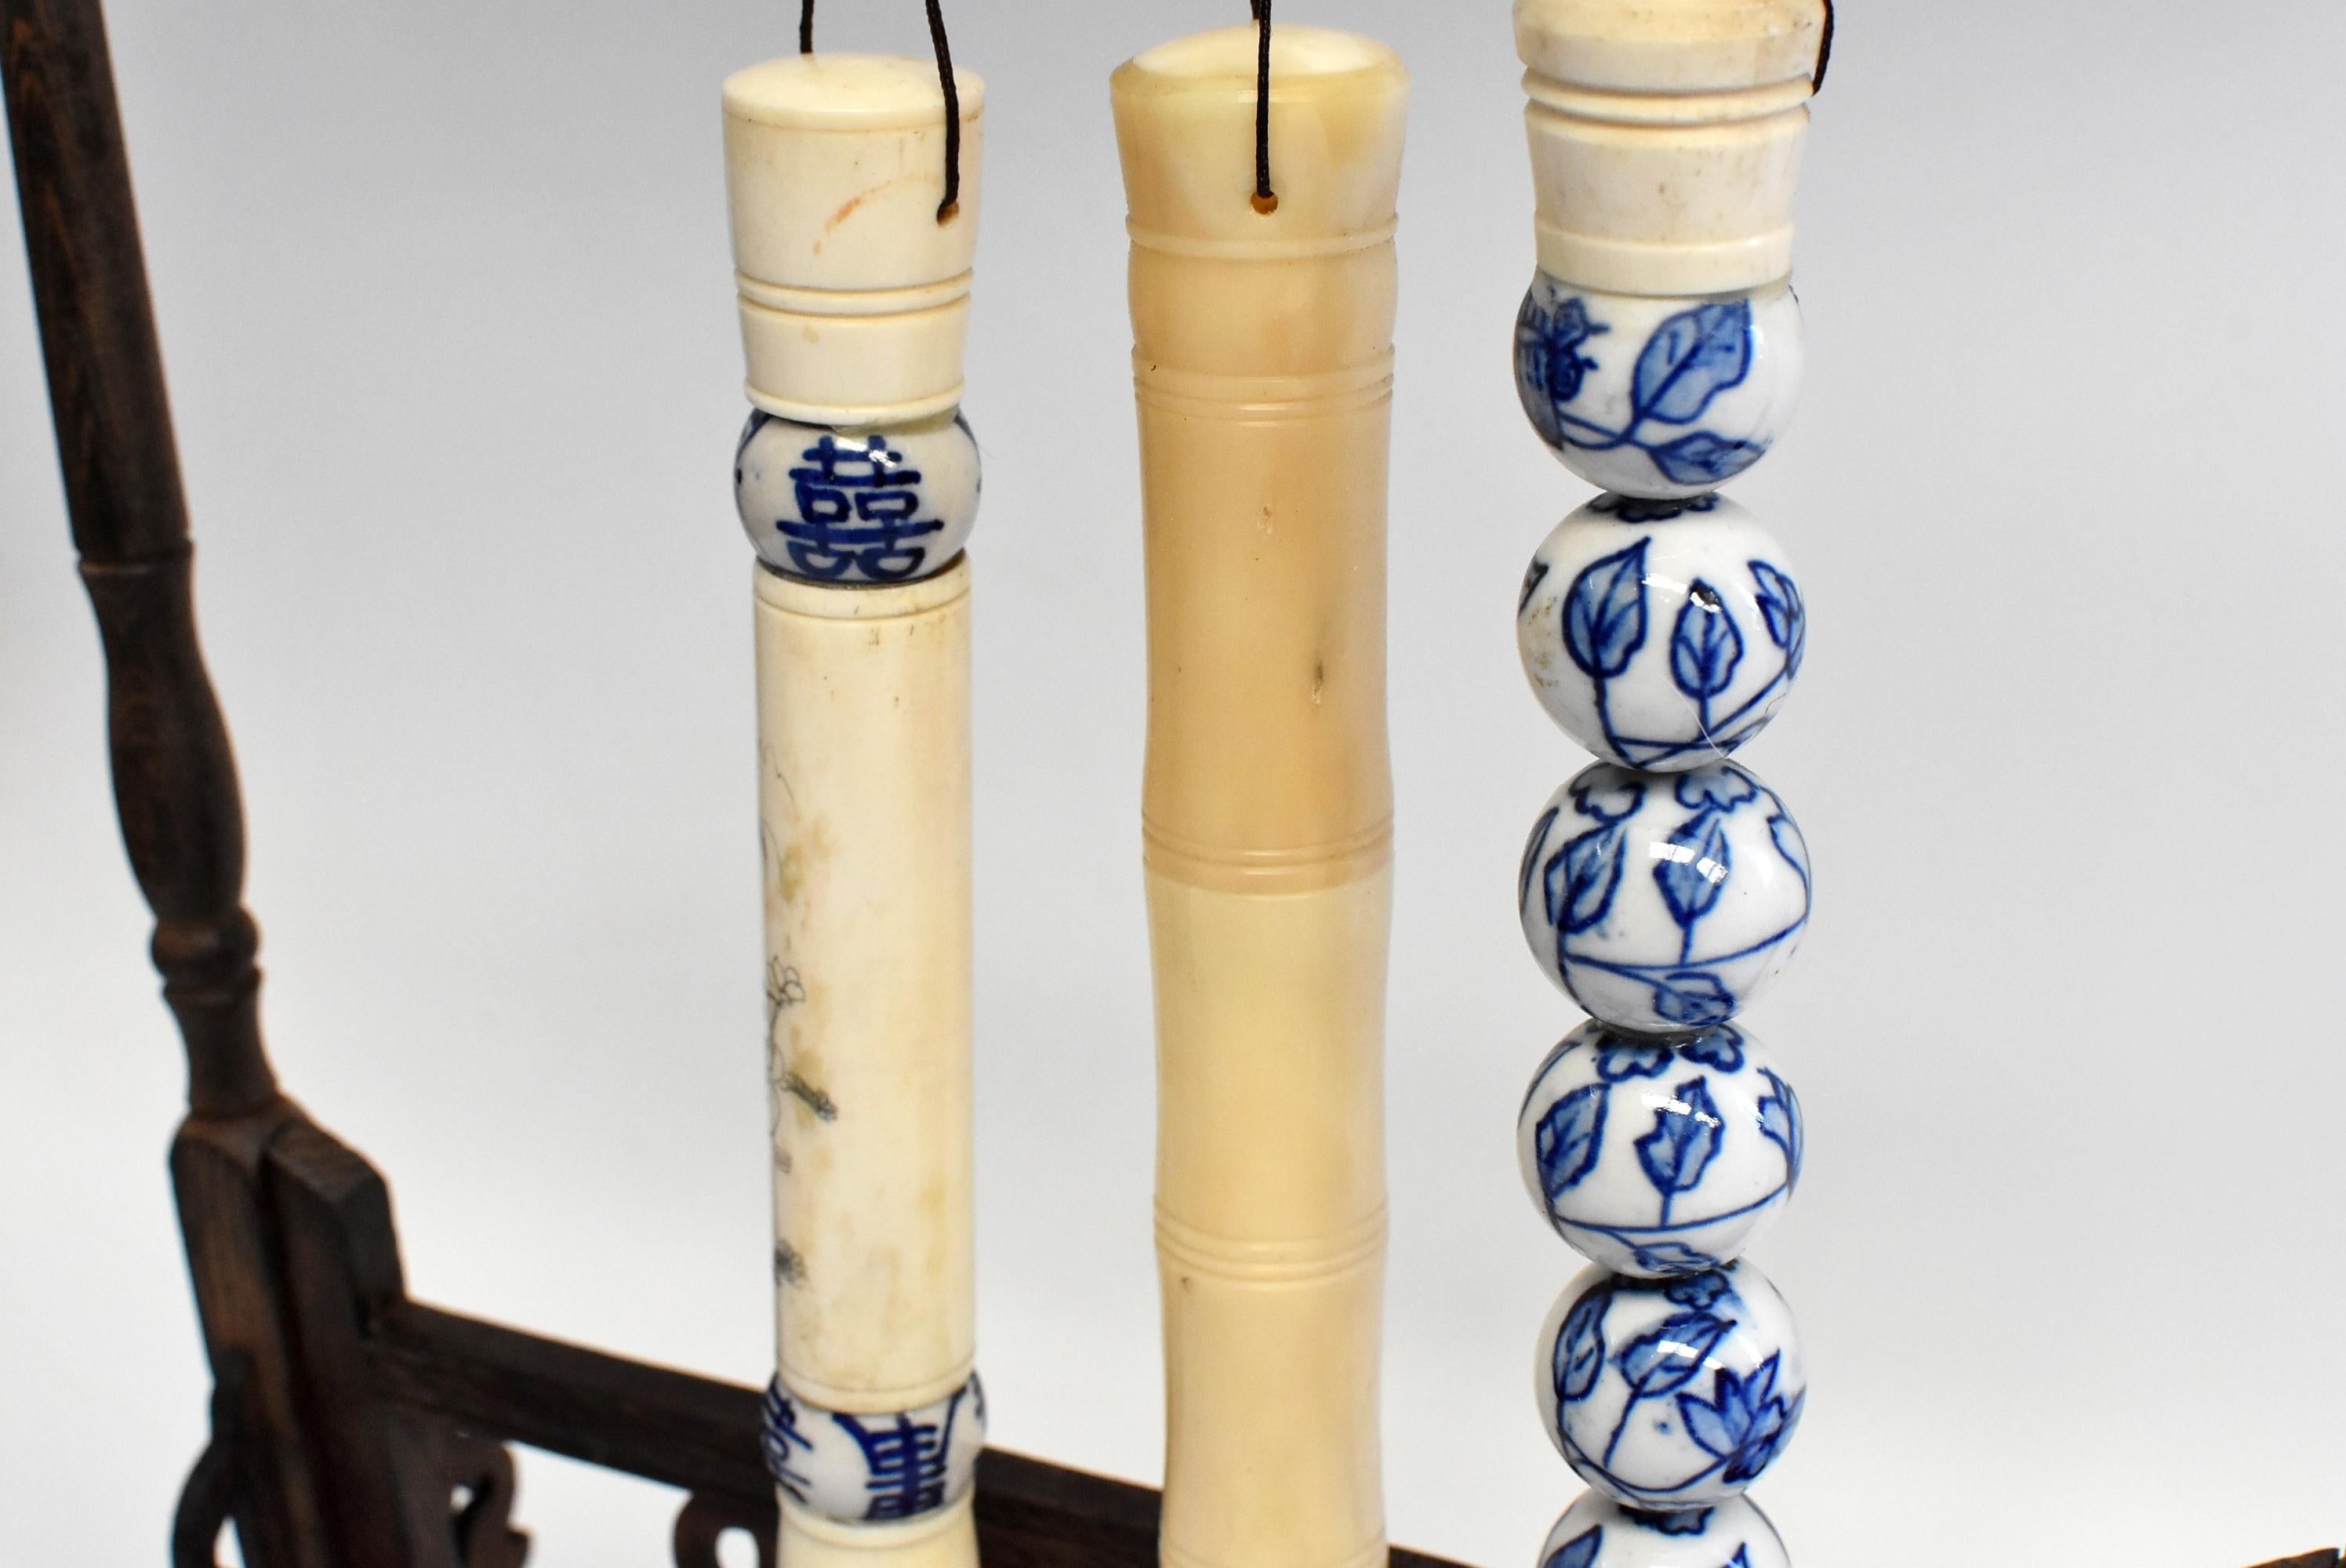 Beautiful set of 3 large Chinese calligraphy brushes with handmade handles. This collection consists 3 brushes among which 1 with a bamboo pattern cow bone handle, 1 with hand painted blue and white porcelain balls, and 1 with a finely carved bone